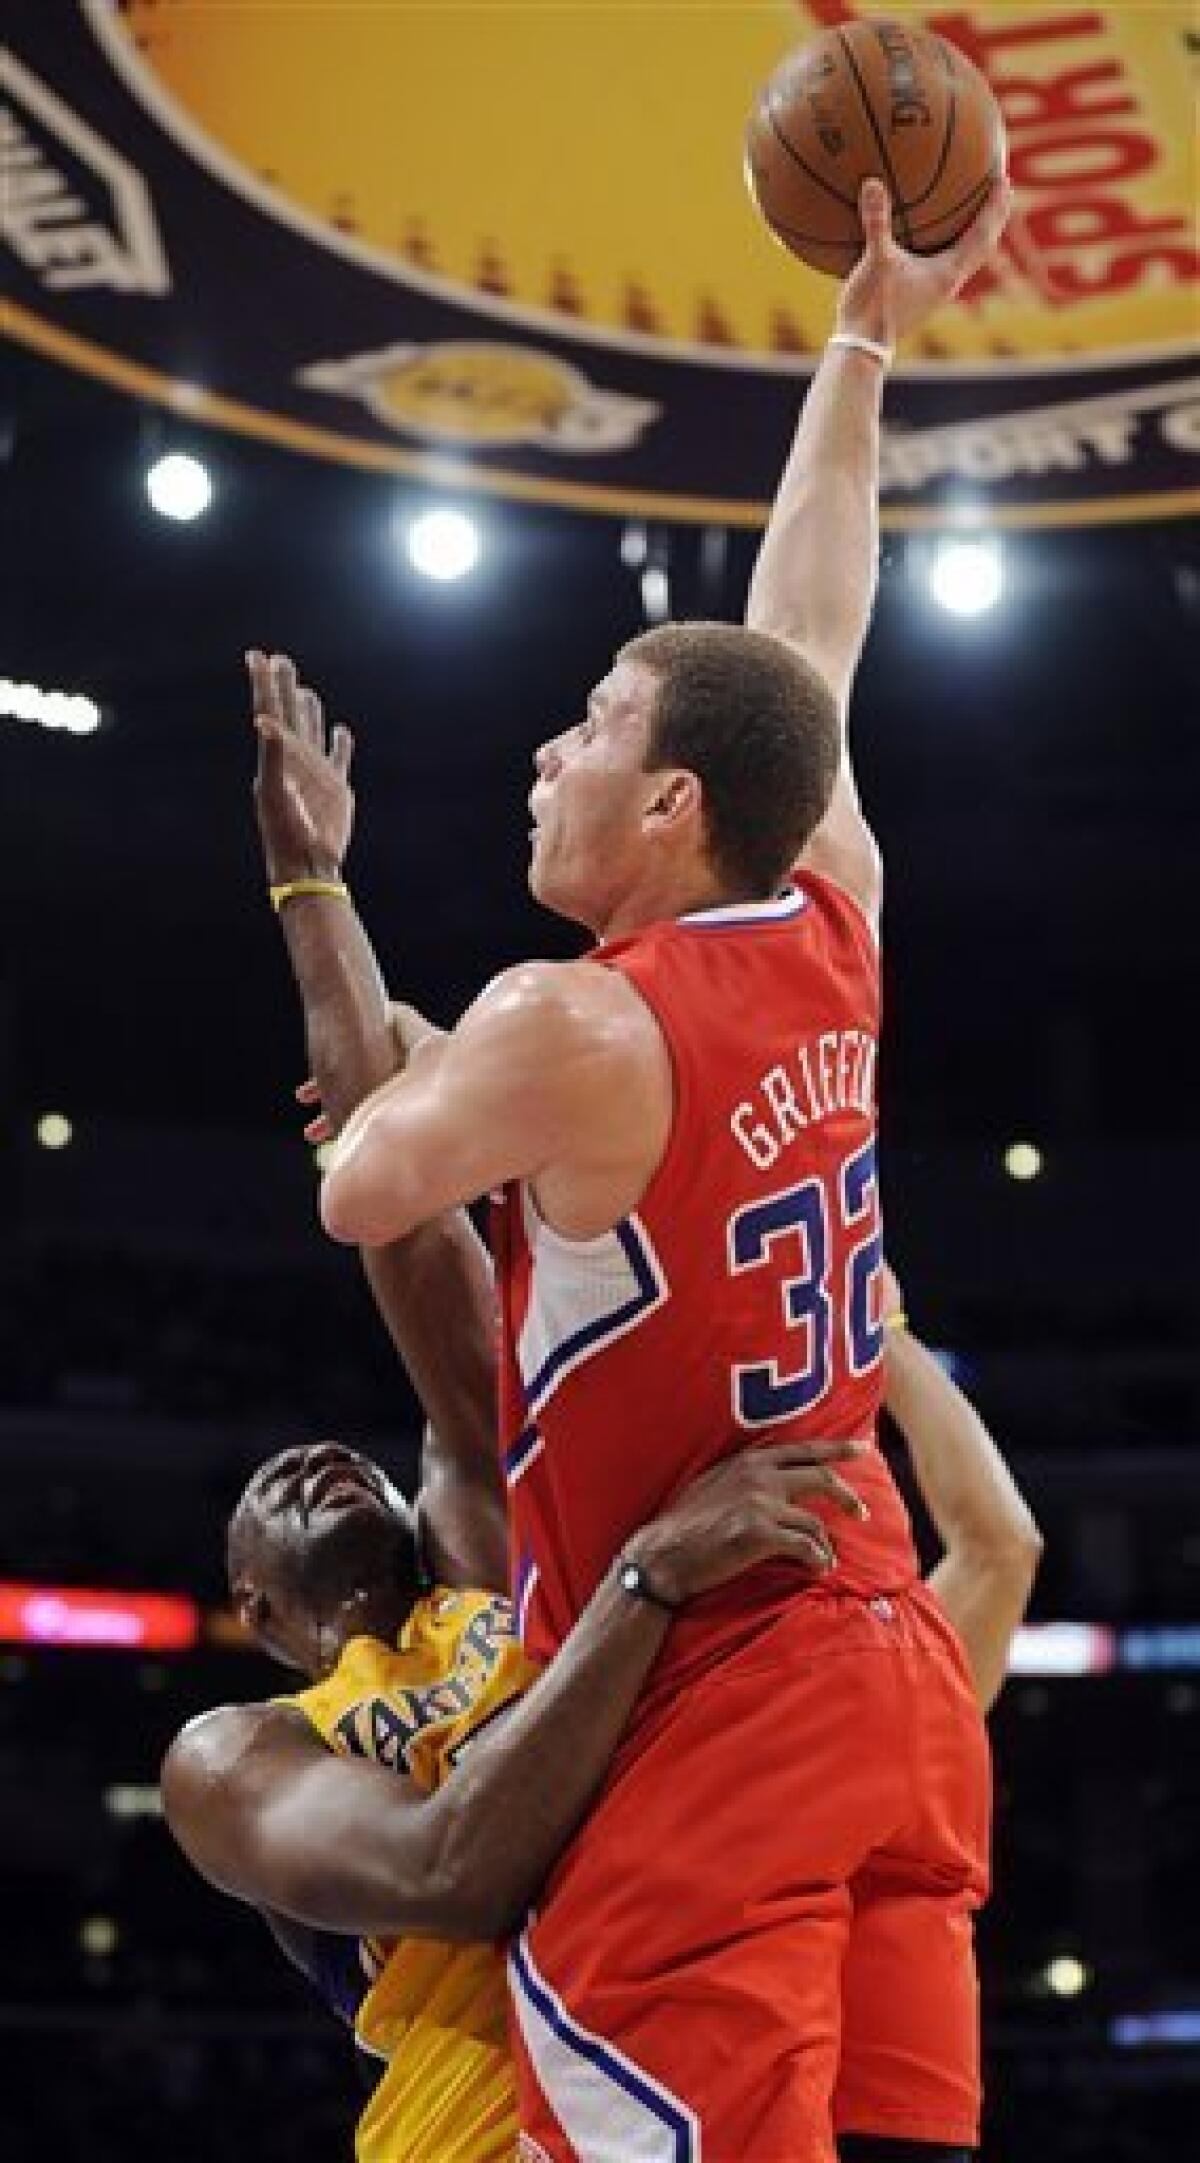 Los Angeles Lakers forward Blake Griffin (32) makes a move with the  basketball against the Dallas Mavericks during an NBA game, Dec. 5, 2012 in  Los Angeles. The Clippers defeated the Mavericks